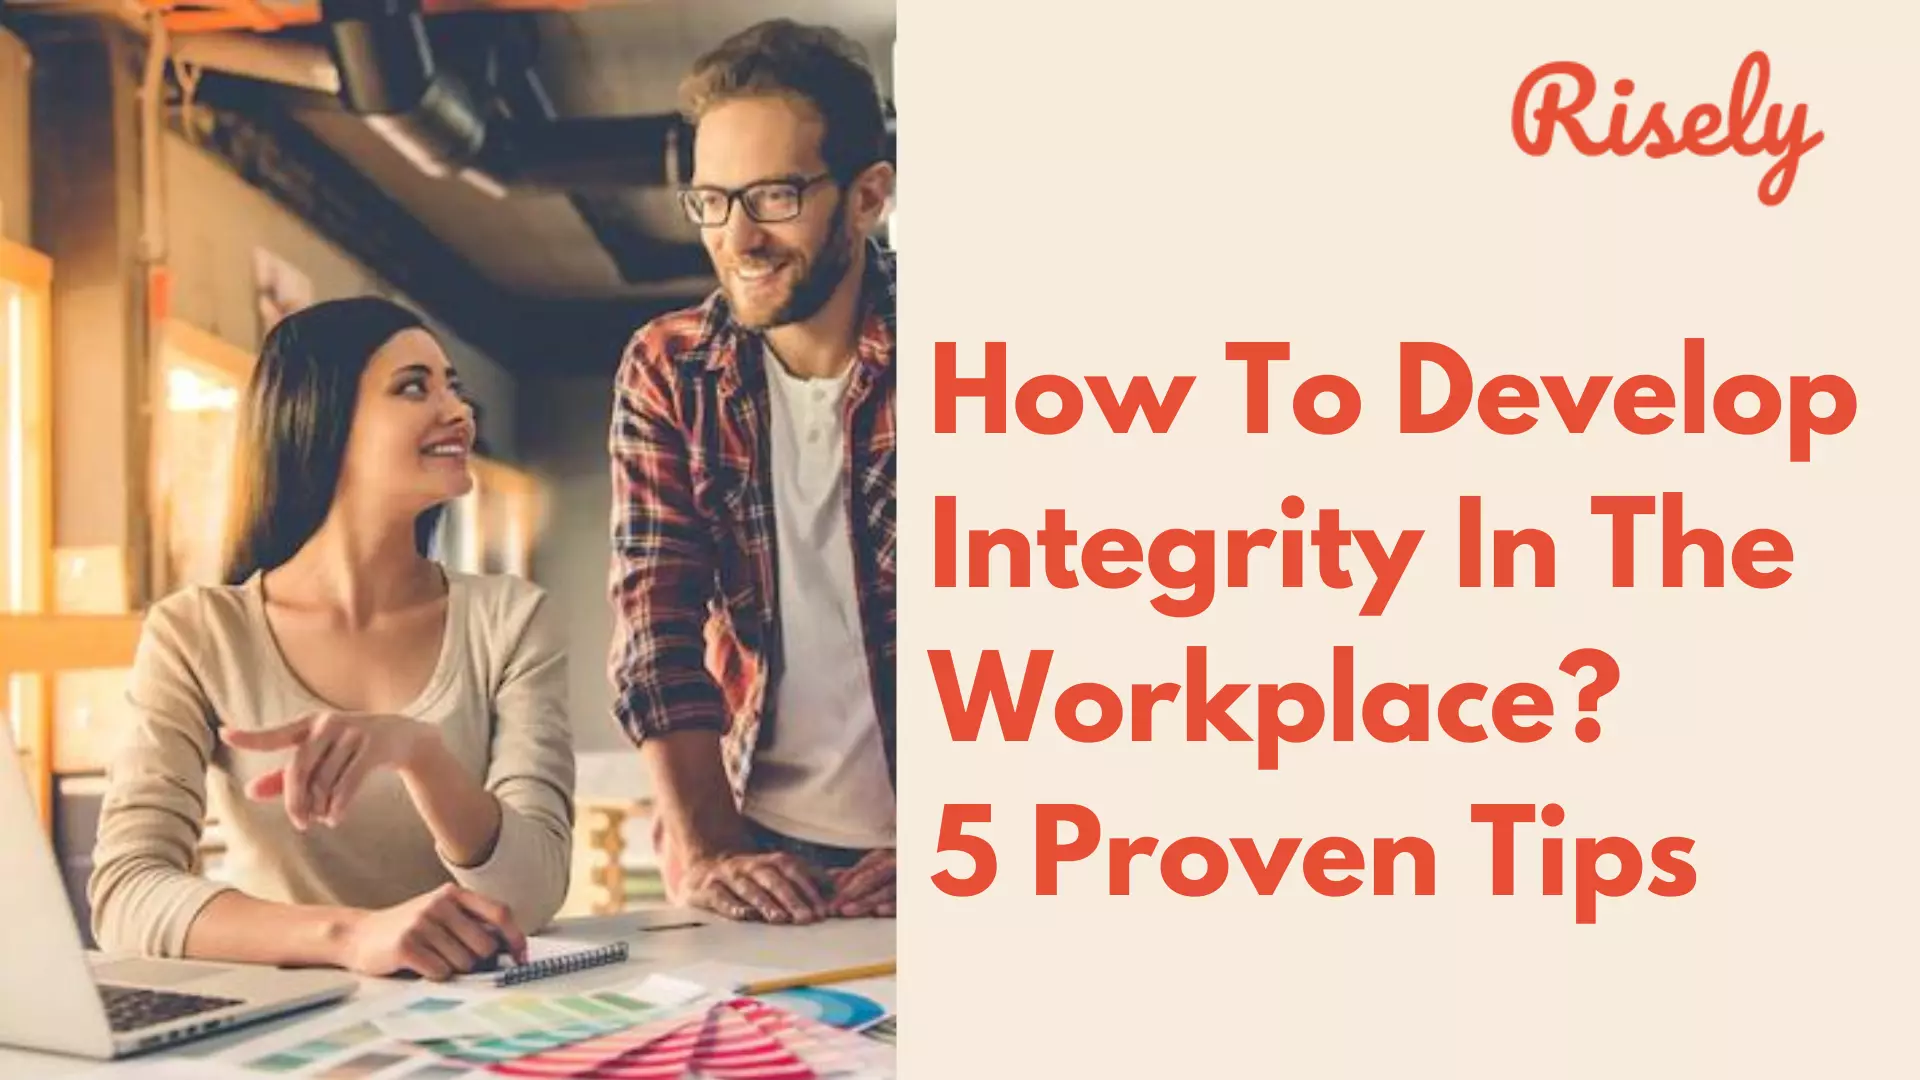 How To Develop Integrity In The Workplace? 5 Proven Tips